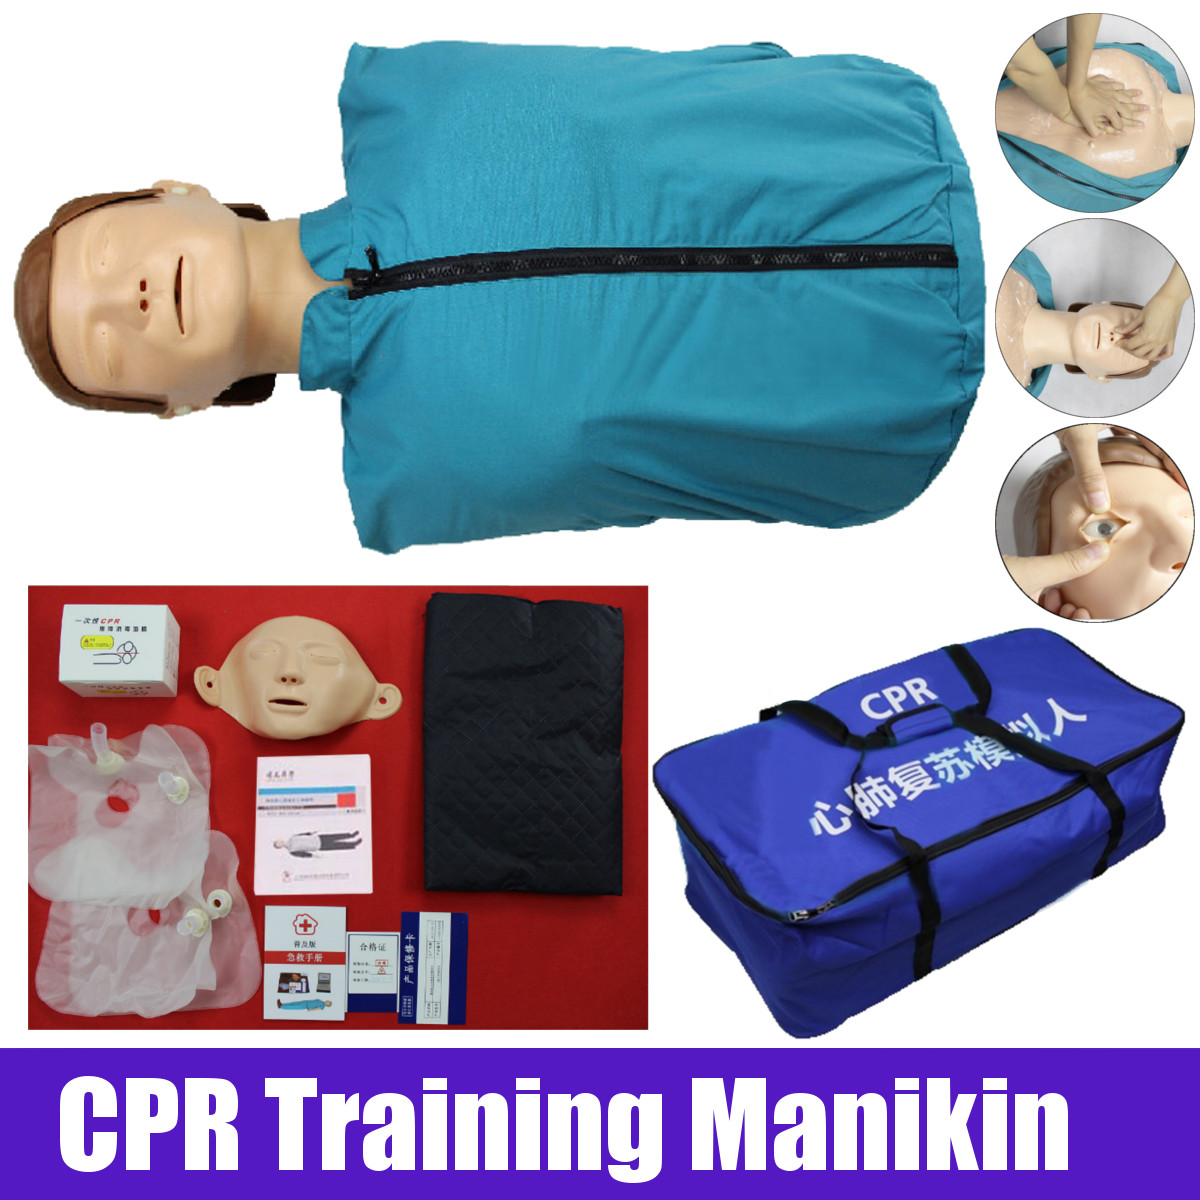 CPR-Adult-Manikin-AED-First-Aid-Training-Dummy-Training-Medical-Model-Respiration-Human-1545480-9